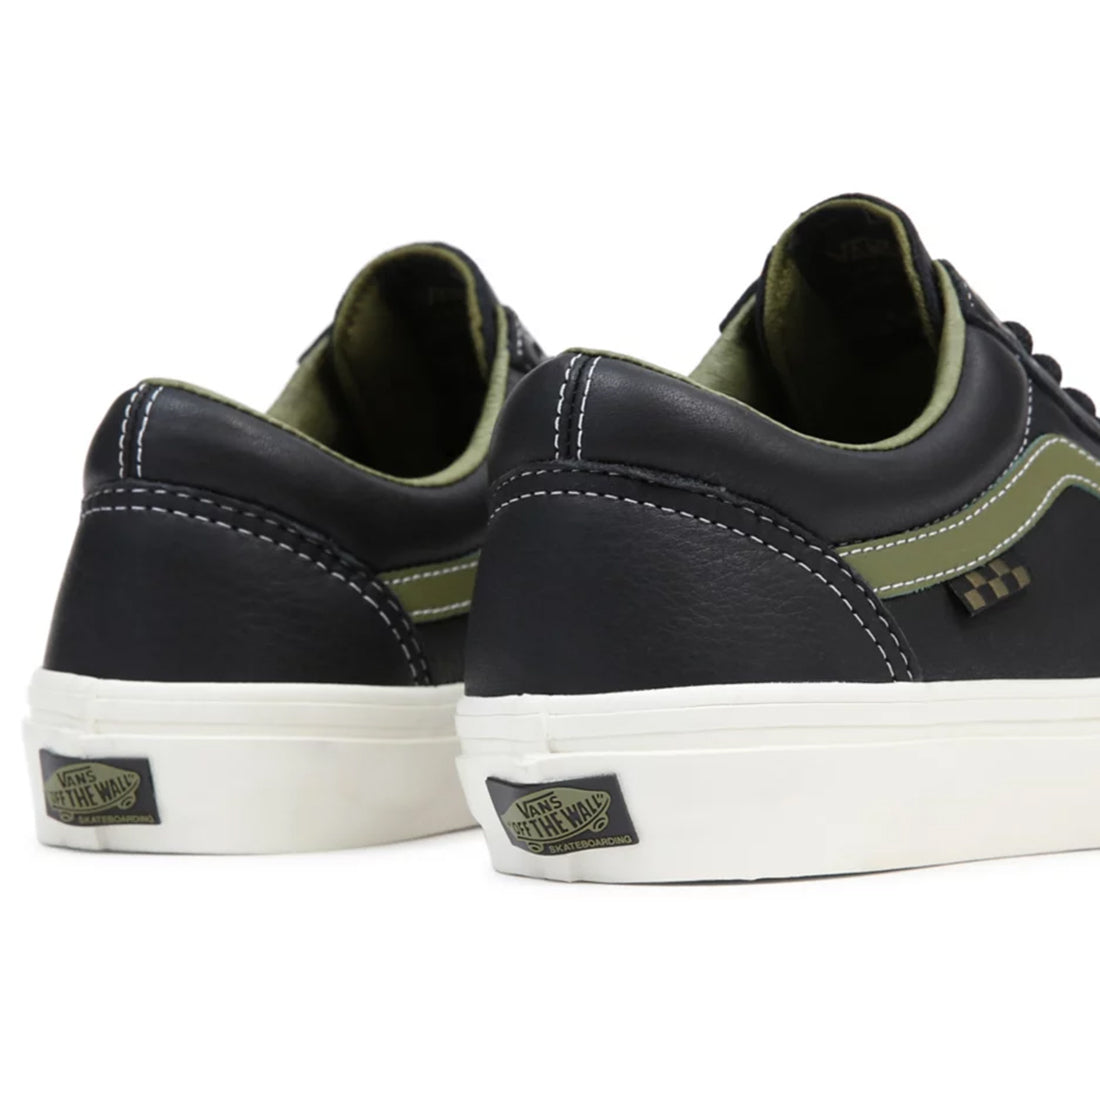 Vans Low Shoes - Old Skool Butter Leather - Green